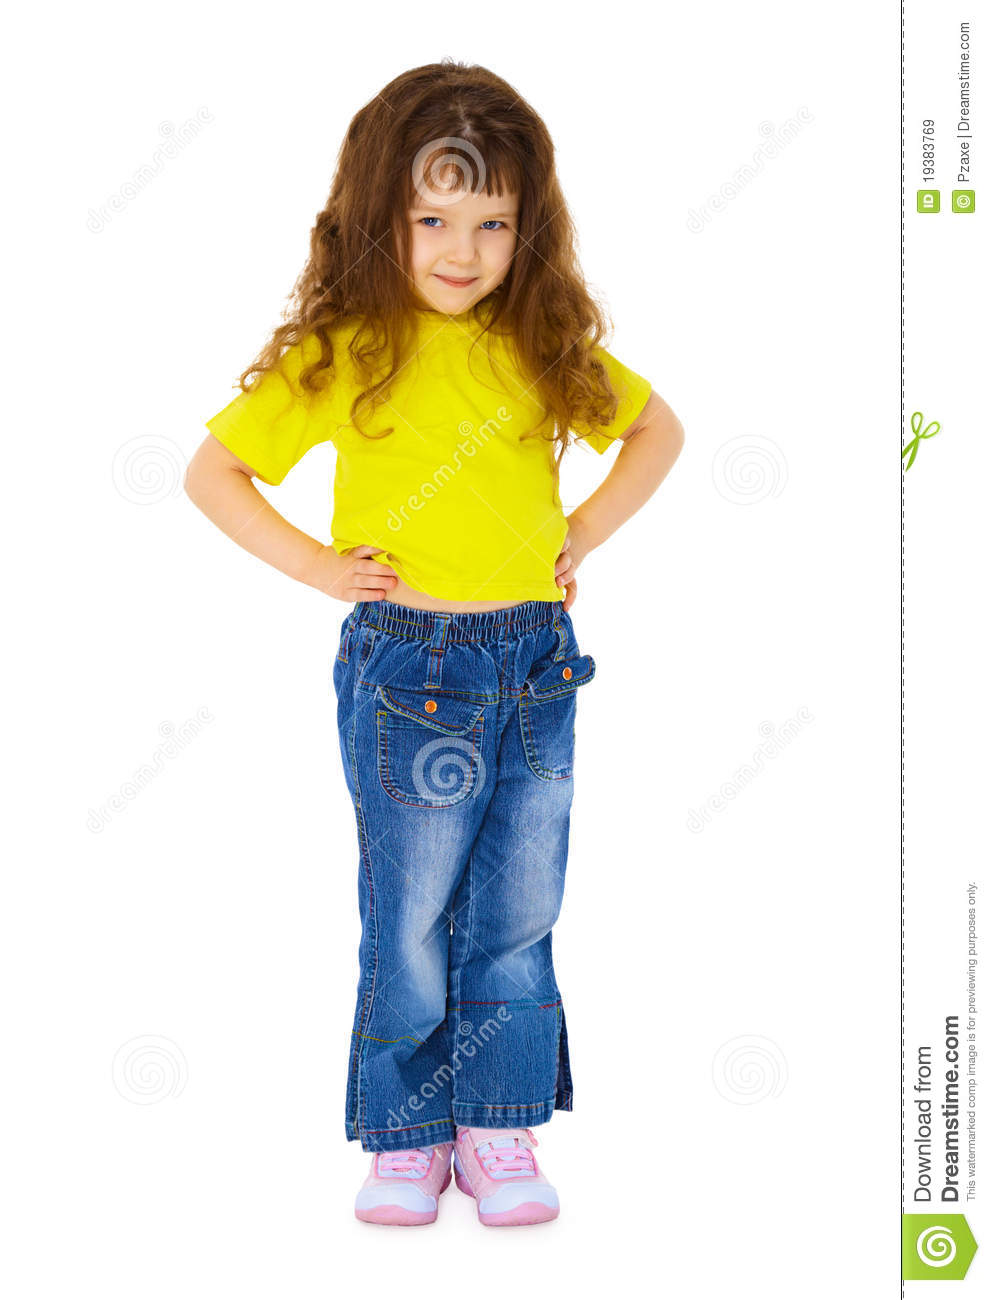 Little Girl In Jeans On White Background Royalty Free Stock Images